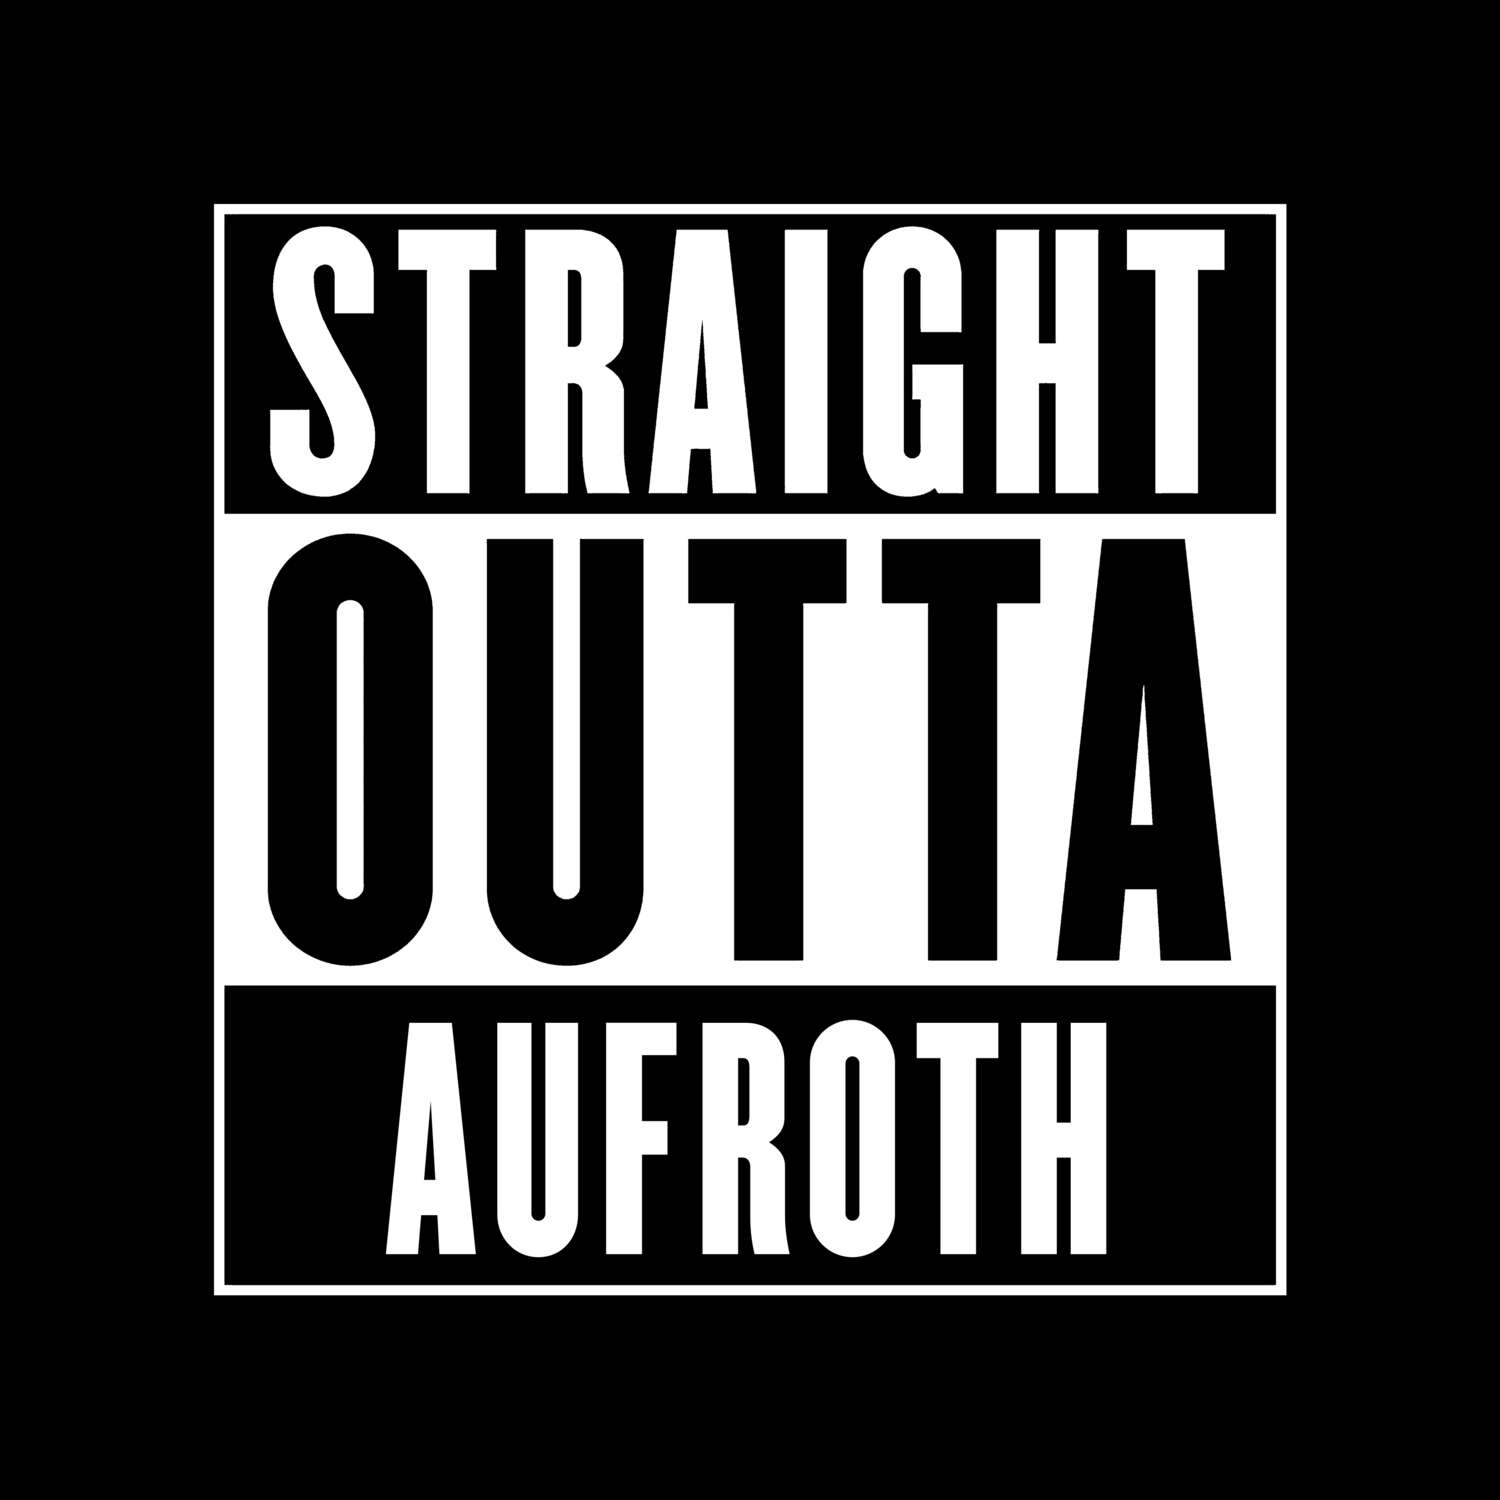 Aufroth T-Shirt »Straight Outta«